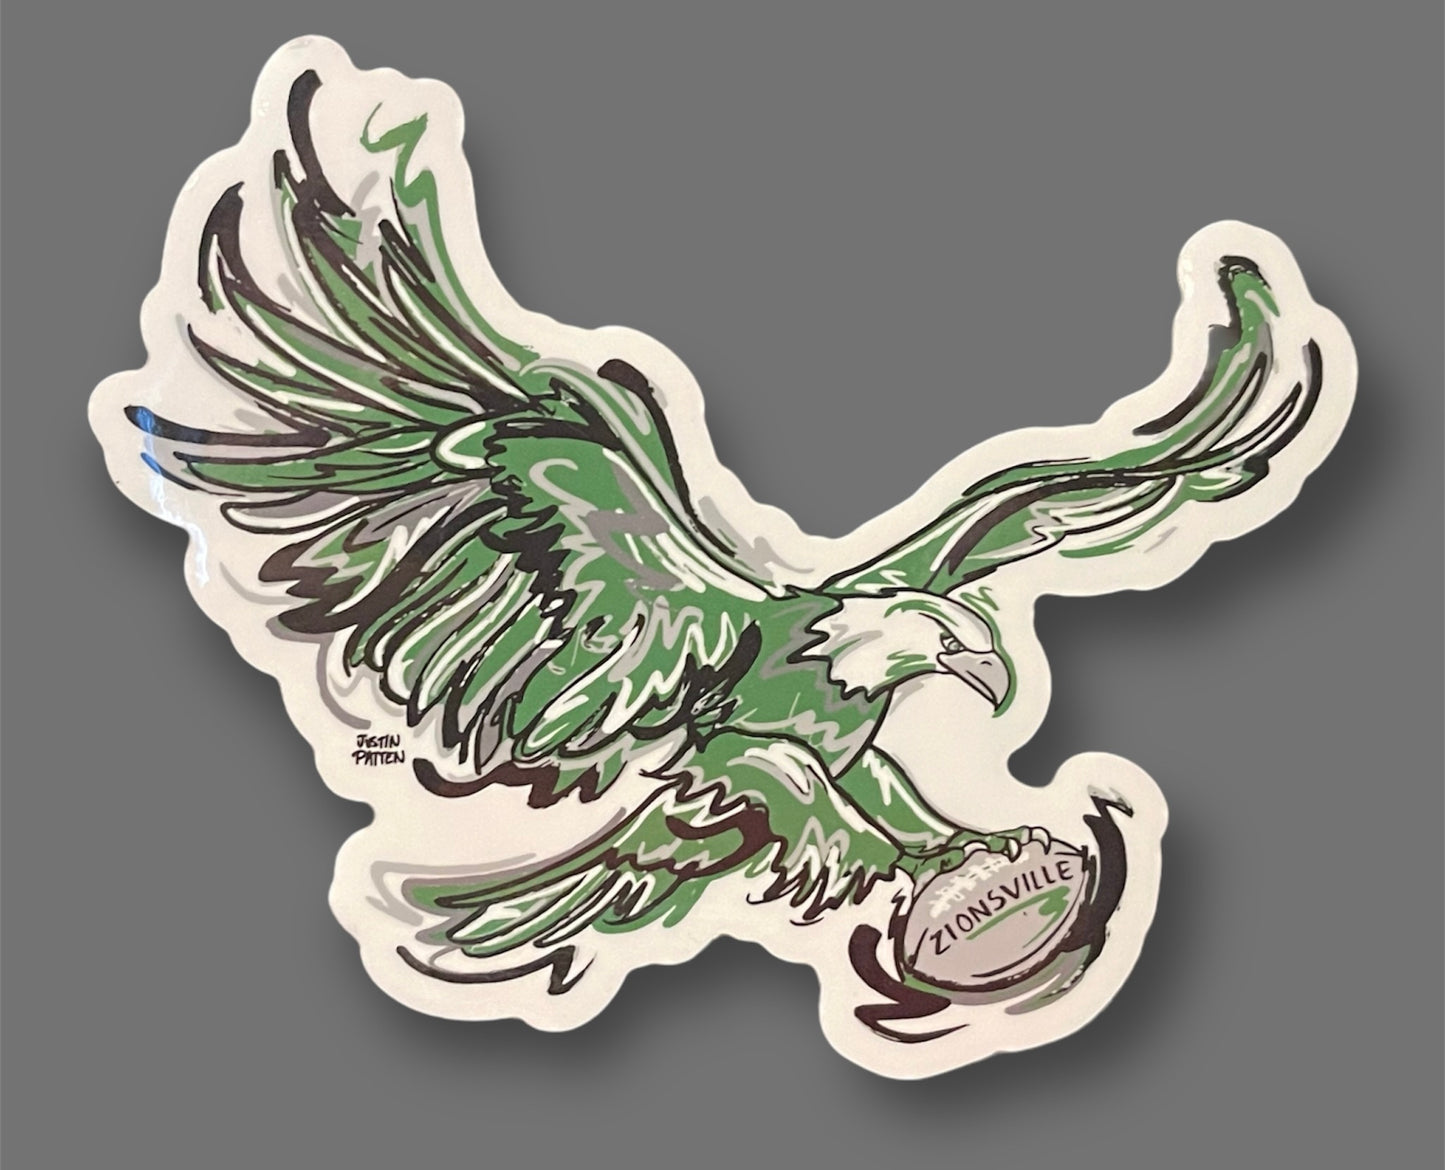 Zionsville Eagle Football  Magnet by Justin Patten